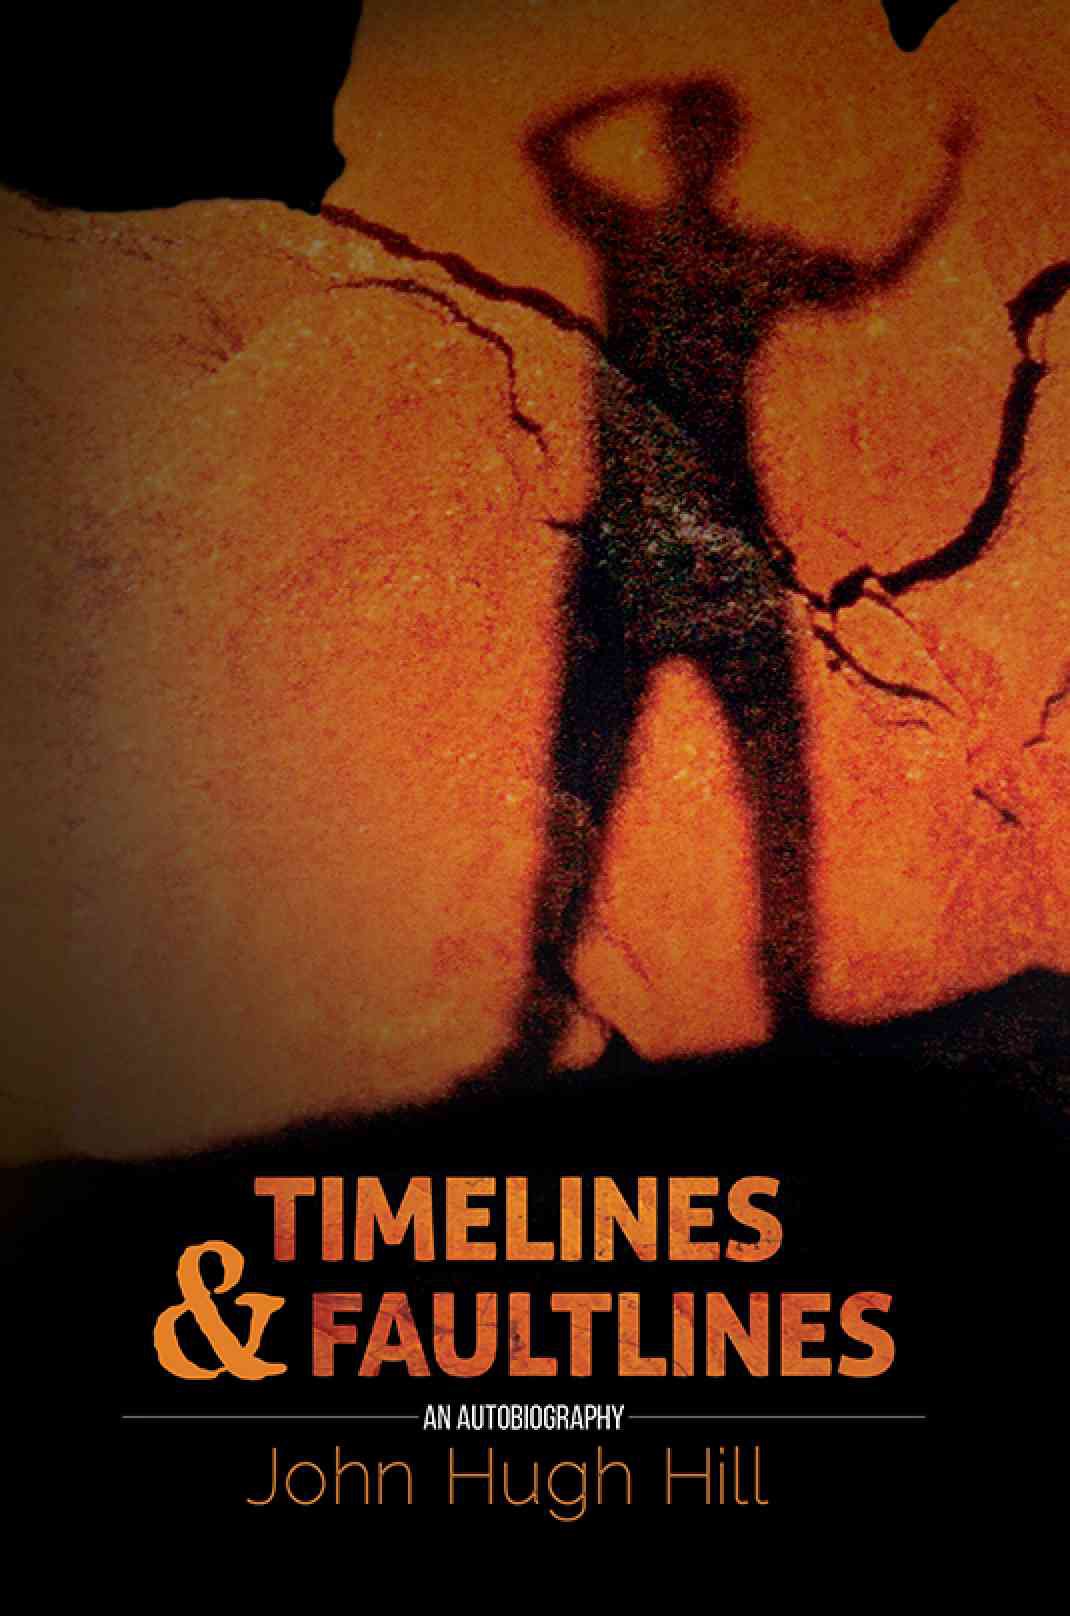 Blog by John Hill on his book, 'Time Lines And Fault Lines'